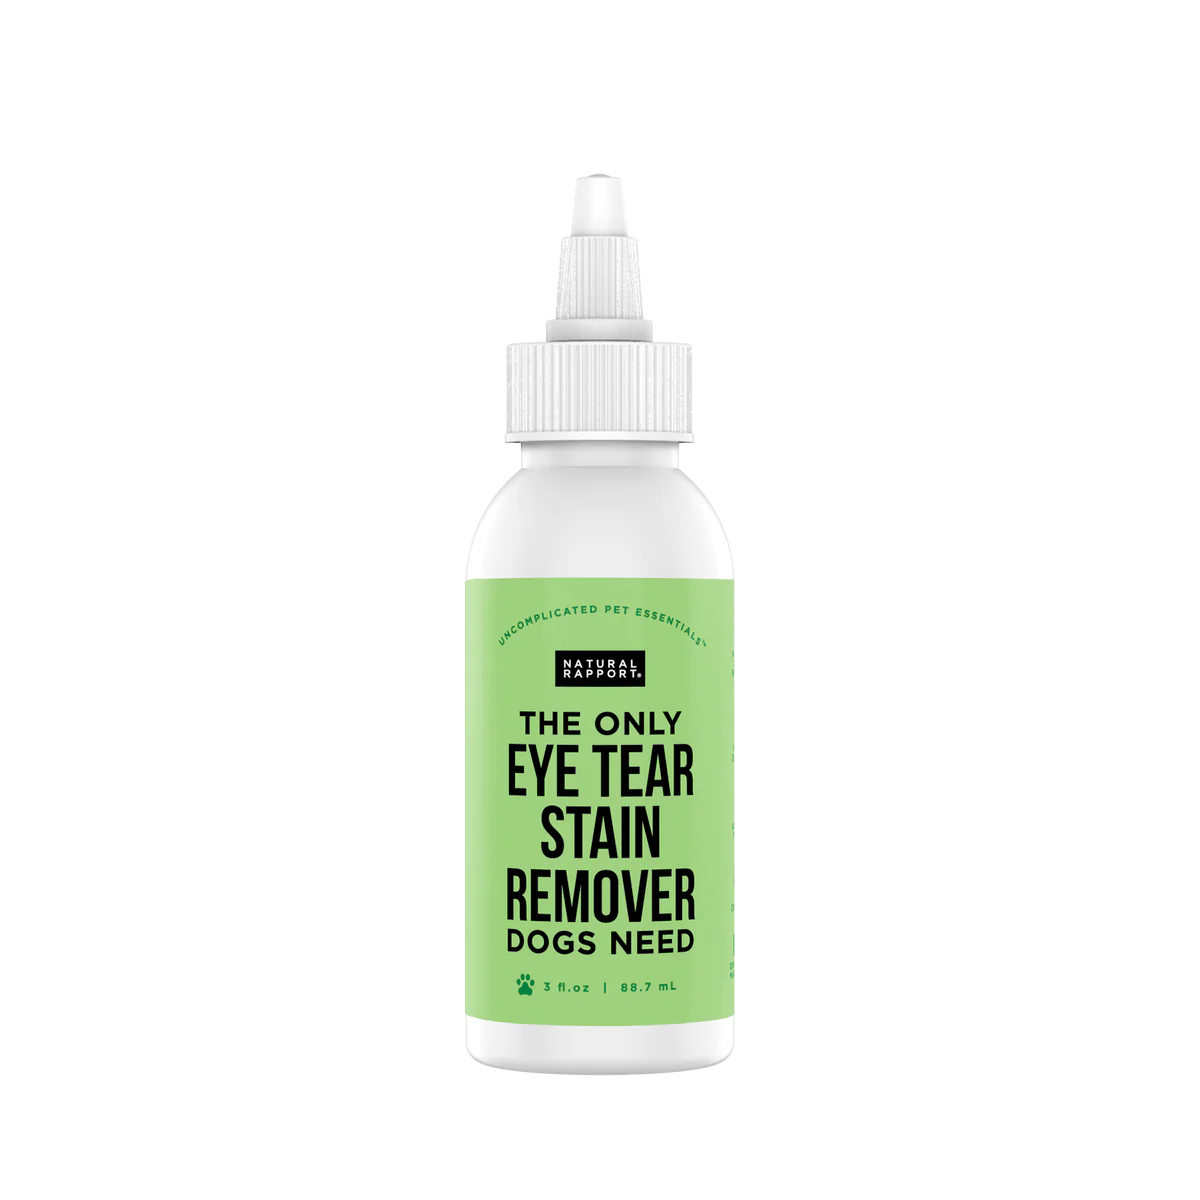 THE ONLY EYE TEAR STAIN REMOVER DOGS NEED